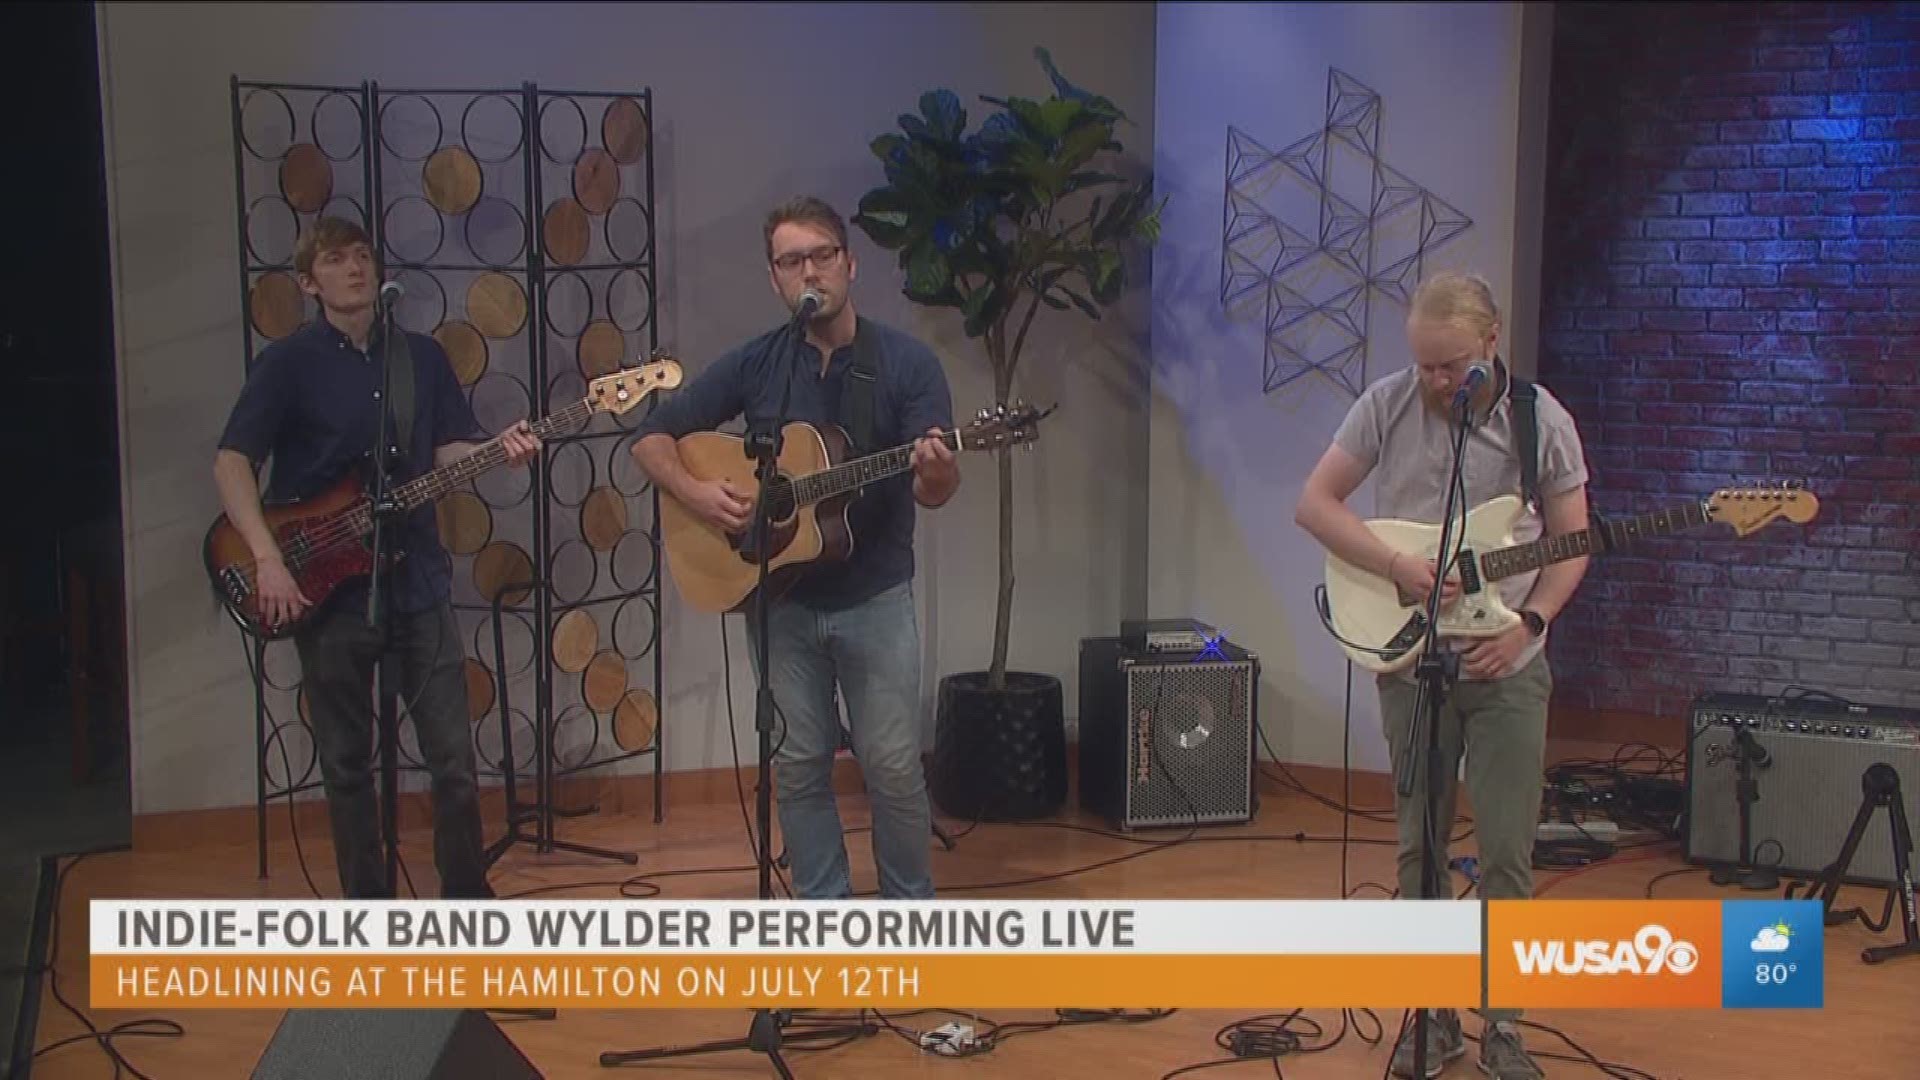 Fredericksburg's own Wylder, an indie-folk band performed on the Great Day Washington stage with their song, 'Right to my Head'. The song is off of their album, Golden Age Thinking, debuting July 12. Love Wylder's music? You can see them live July 12 at The Hamilton in Washington, D.C.